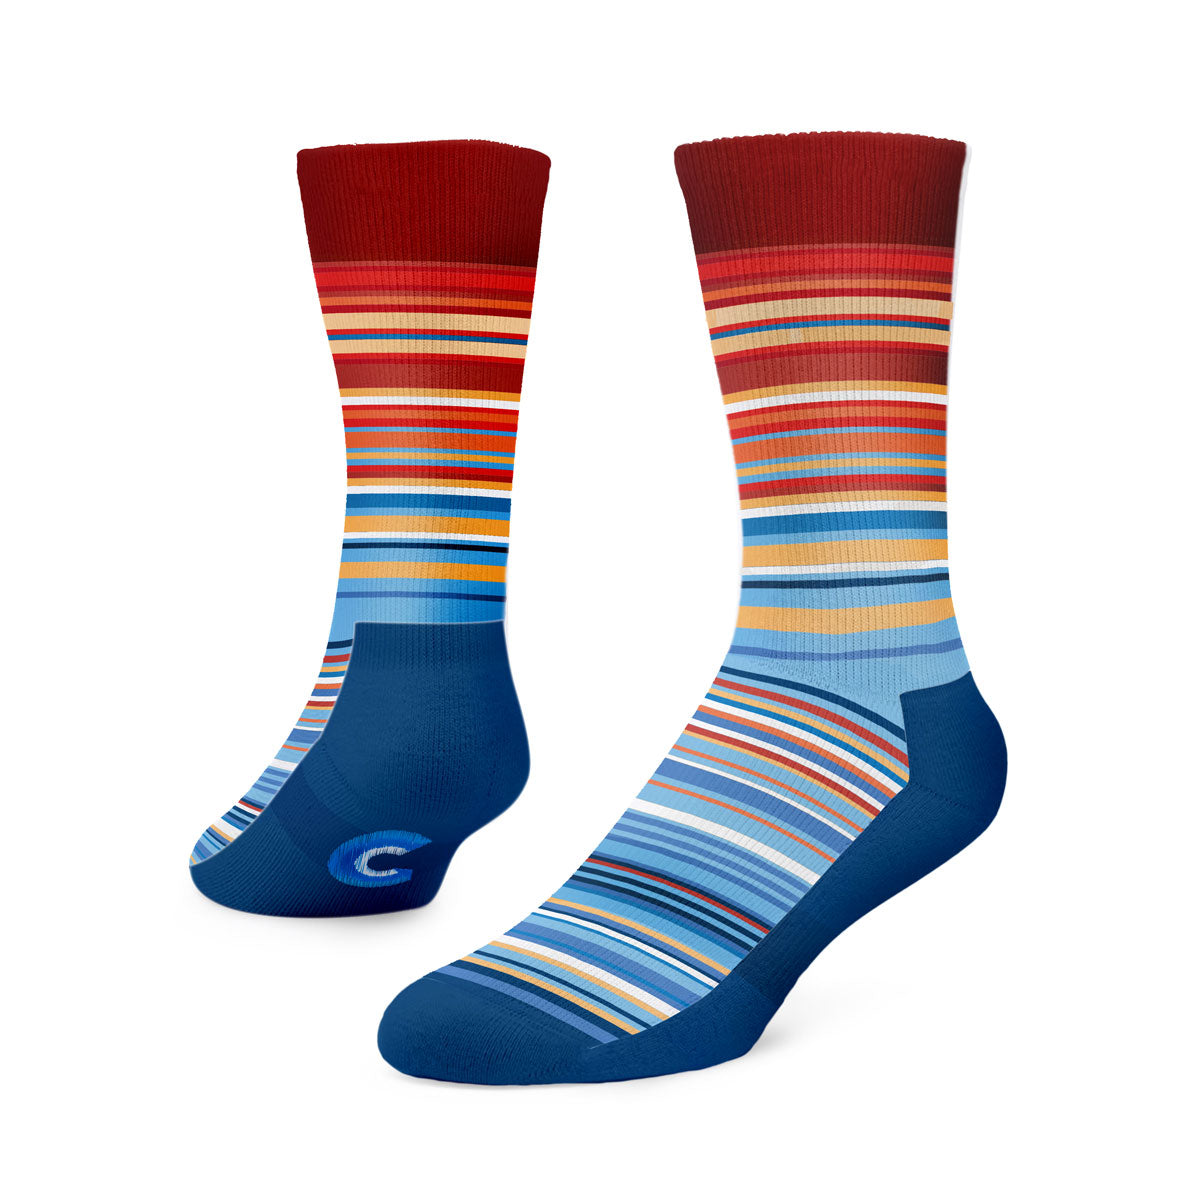 A pair of crew length socks with the climate stripes from toe to heel as the pattern